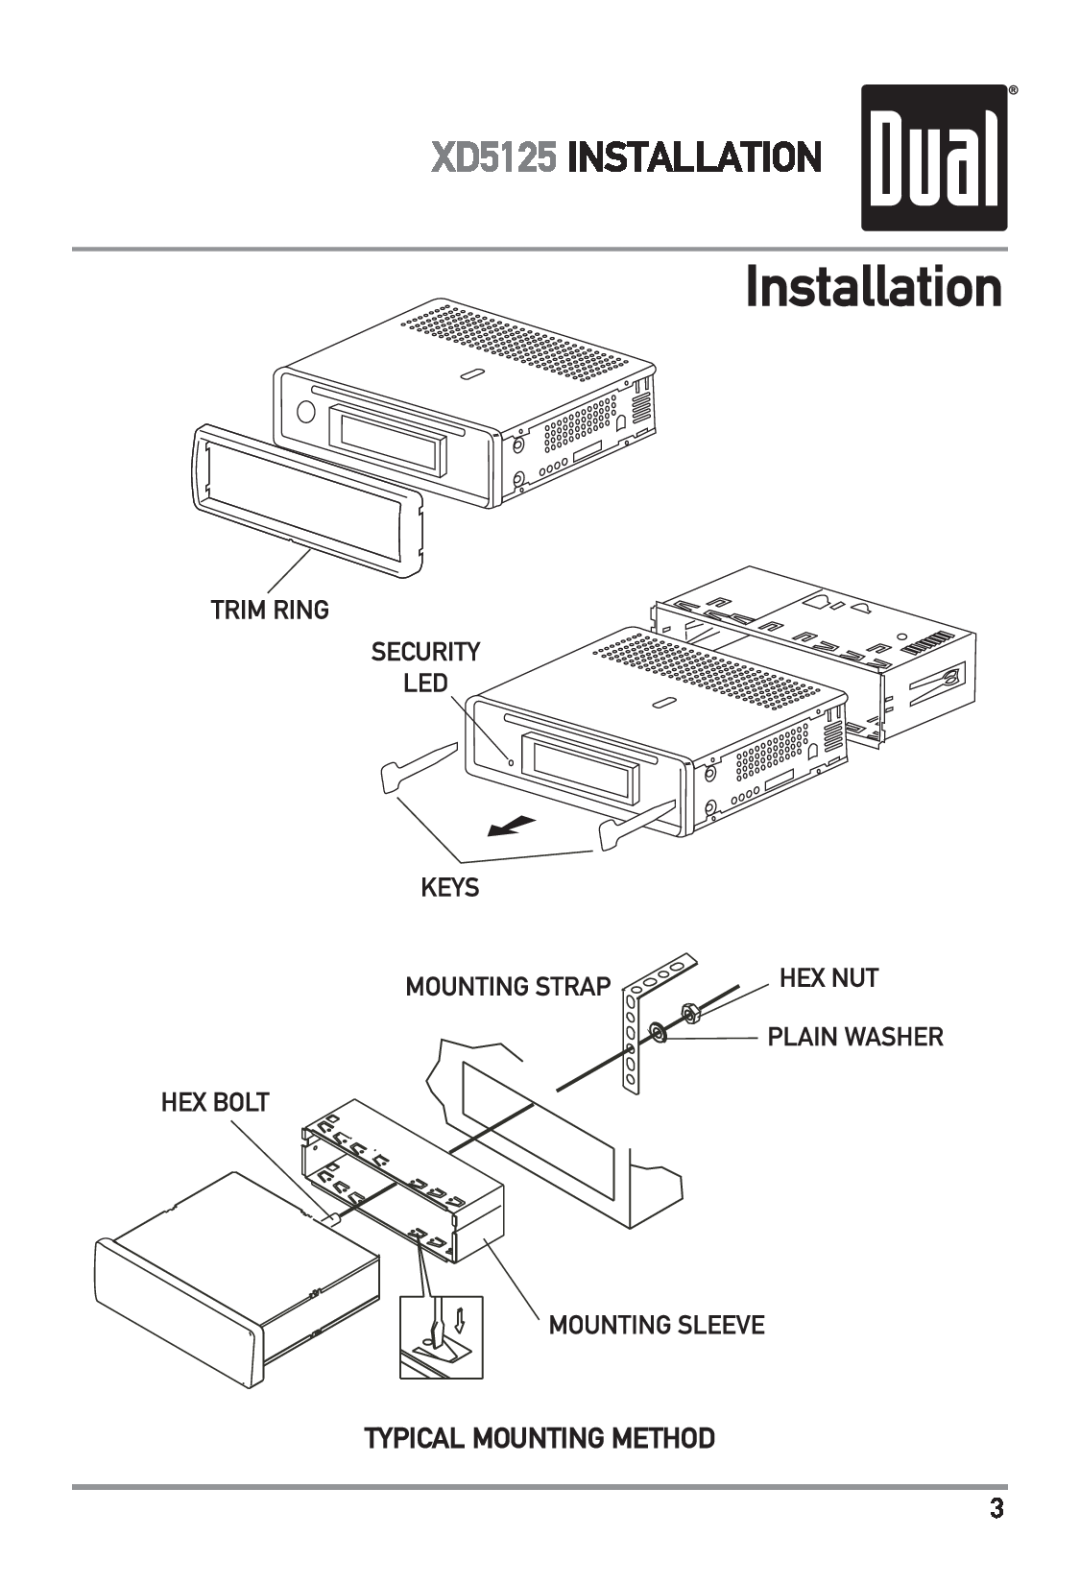 Dual owner manual Installation, XD5125 INSTALLATION, Typical Mounting Method 